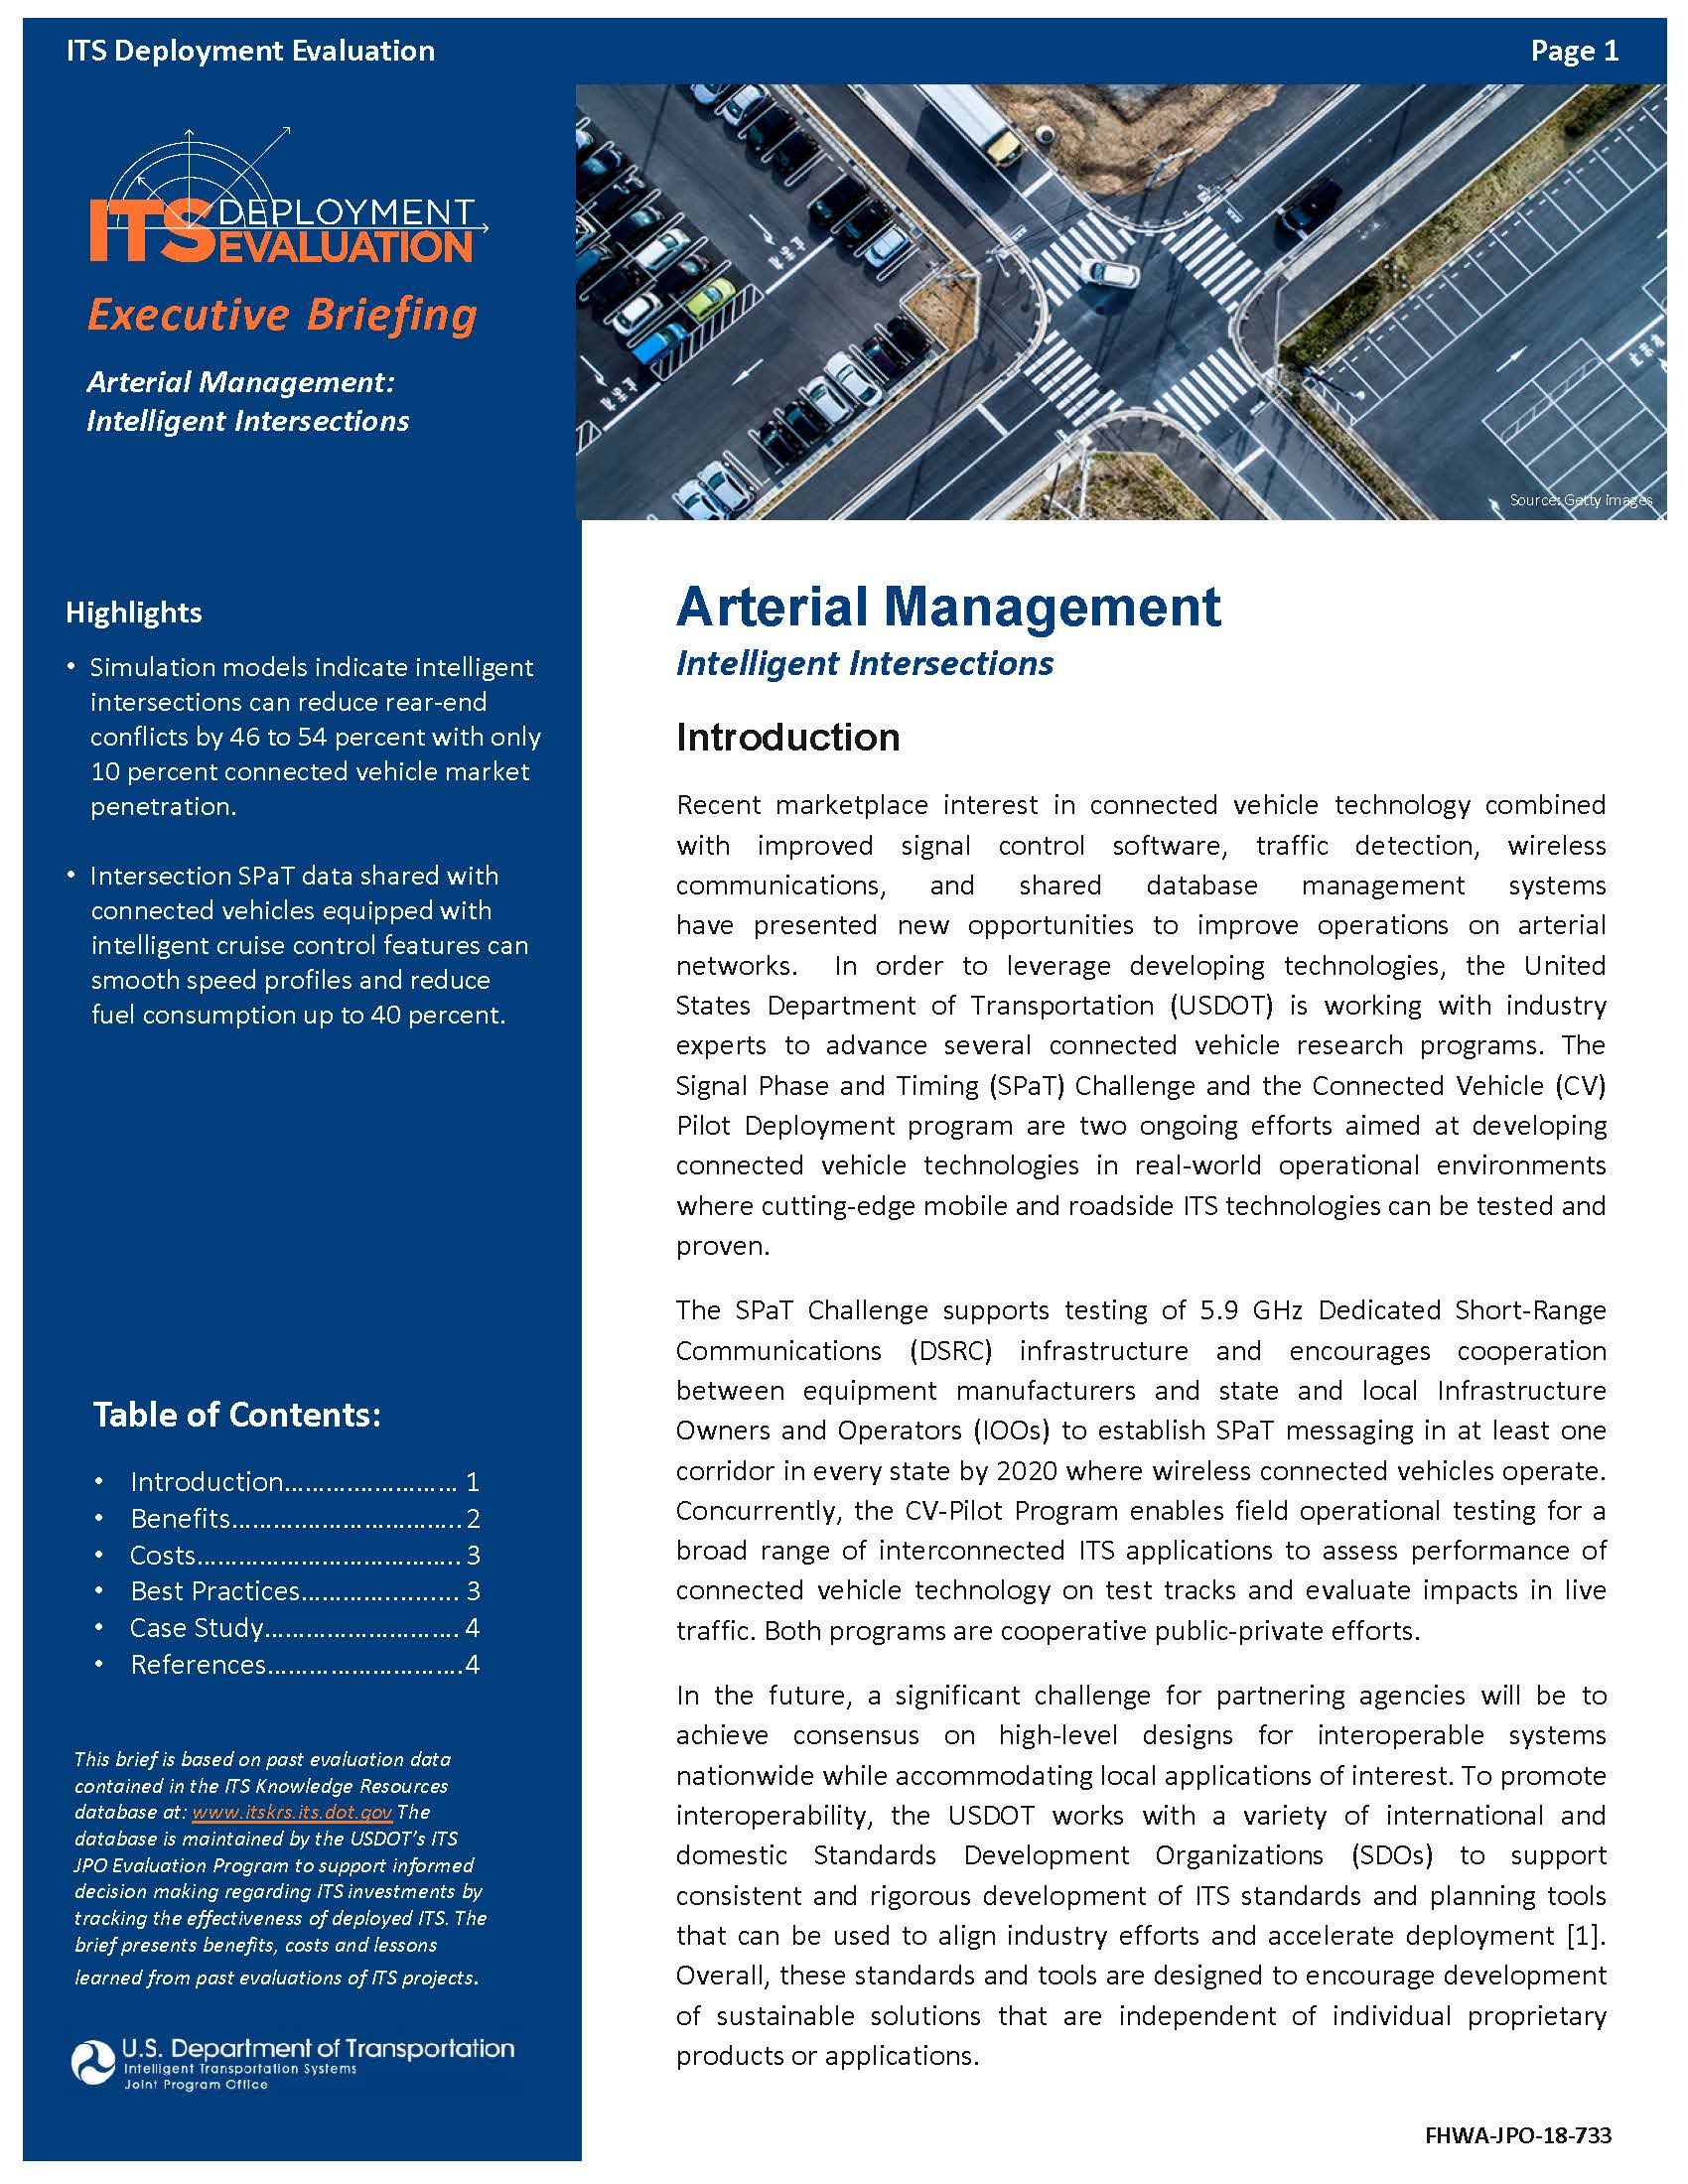 Cover Page of the Arterial Management: Intelligent Intersections 2019 Executive Briefing